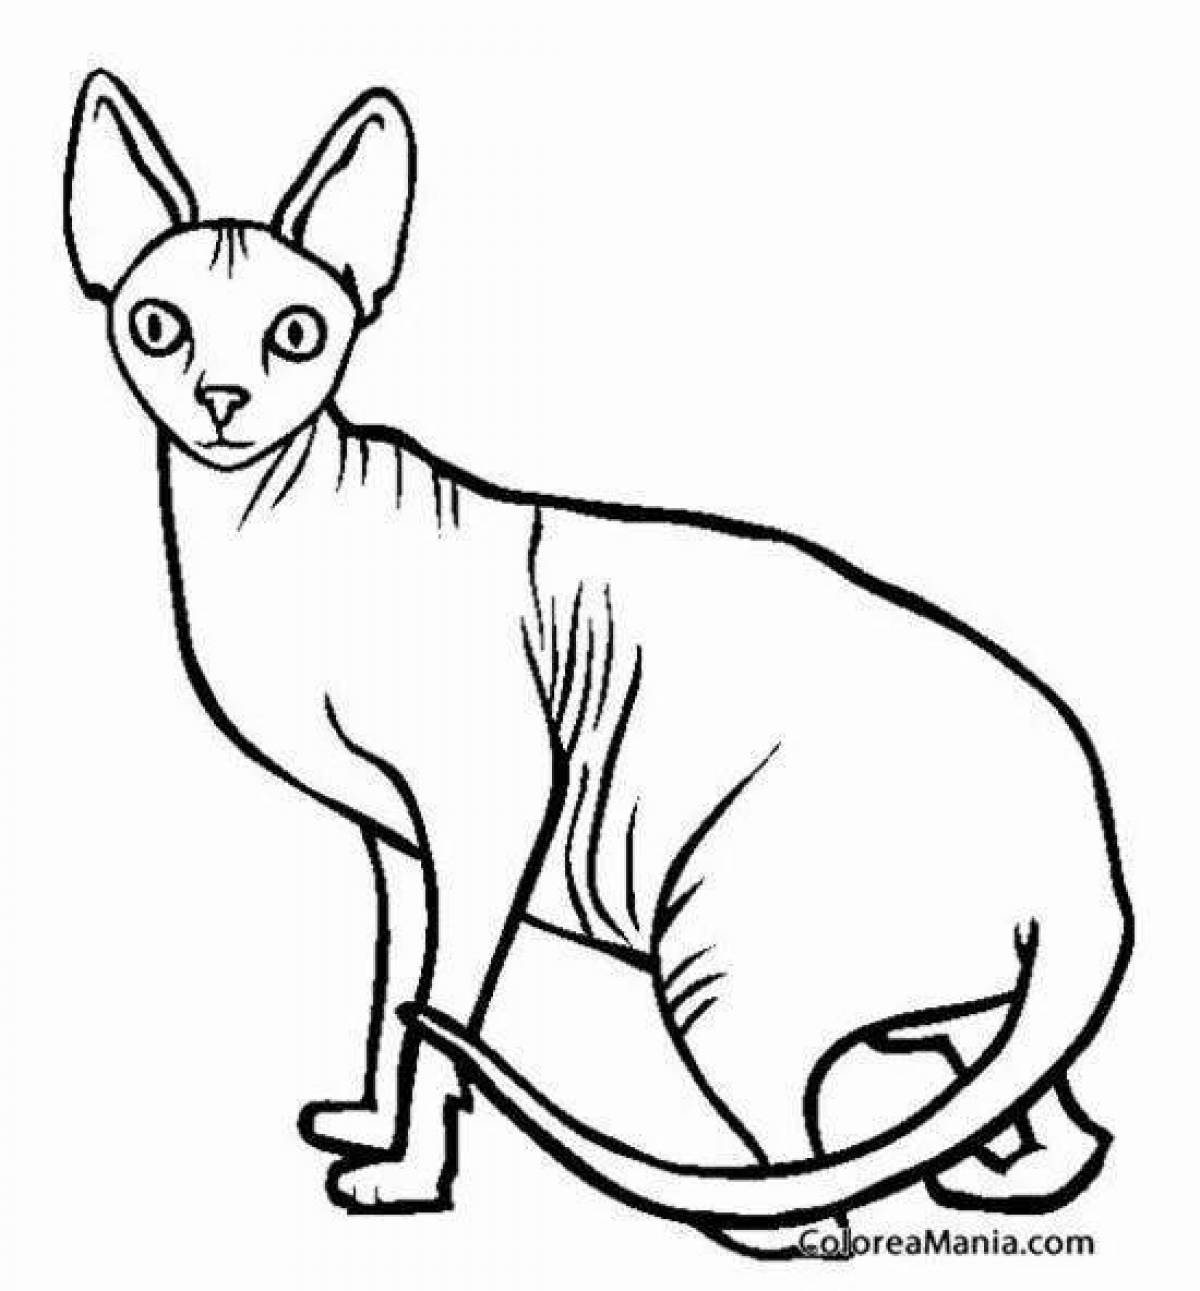 Adorable Sphynx cat coloring book